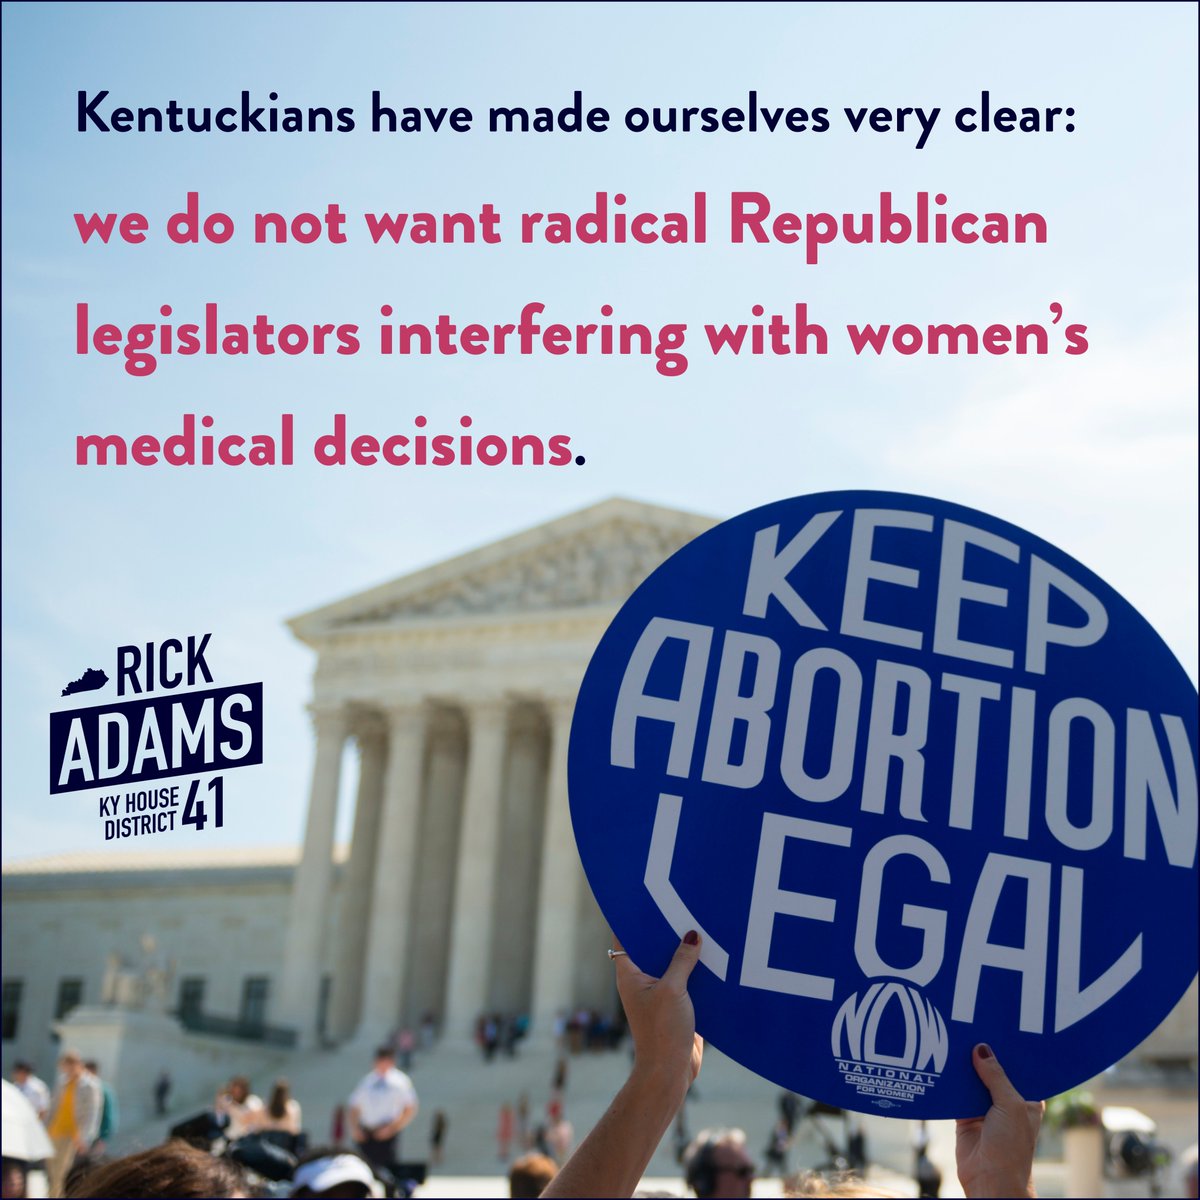 Kentuckians have made ourselves very clear: we do not want radical Republican legislators interfering with women’s medical decisions.

If elected, I will fight to protect reproductive rights. 

Learn more at rickadamsforky.com

#RightToChoose #PickRick